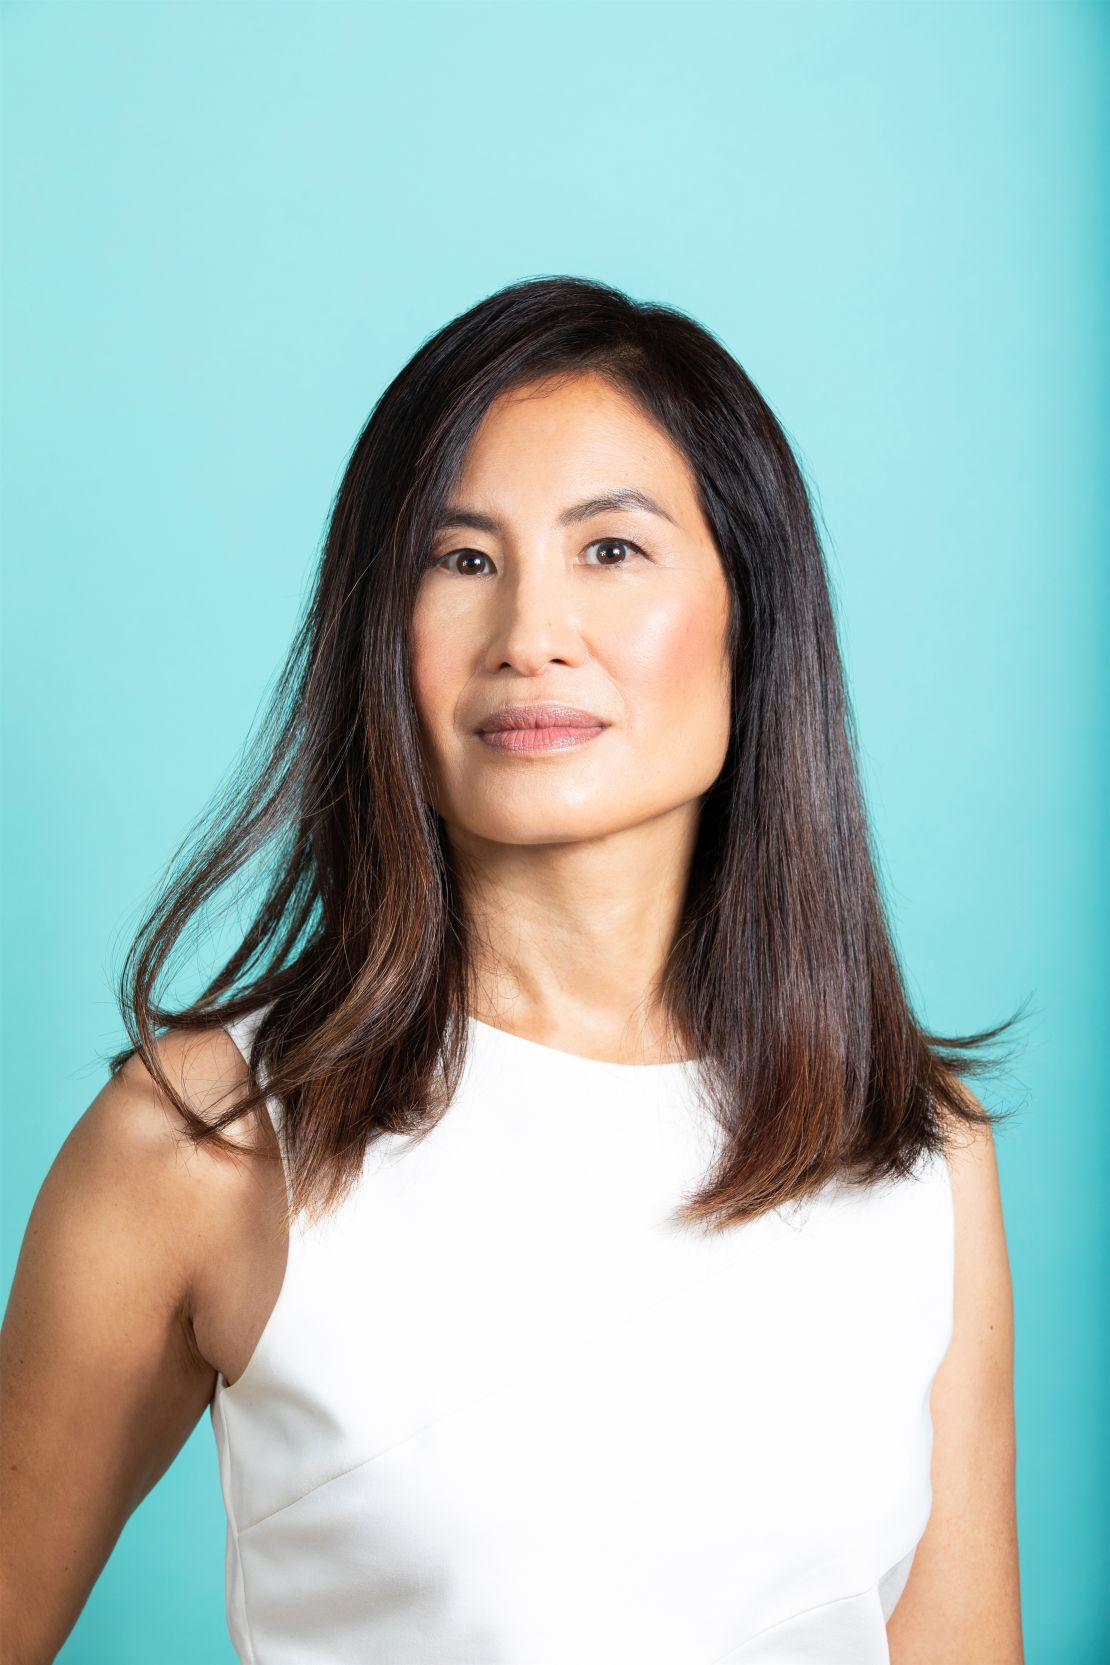 Dr. Carolyn Chen' is an associate professor of ethnic studies at the University of California, Berkeley, and a co-director of the Berkeley Center for the Study of Religion. She is the author of the recently published book Work Pray Code: When Work Becomes Religion in Silicon Valley.